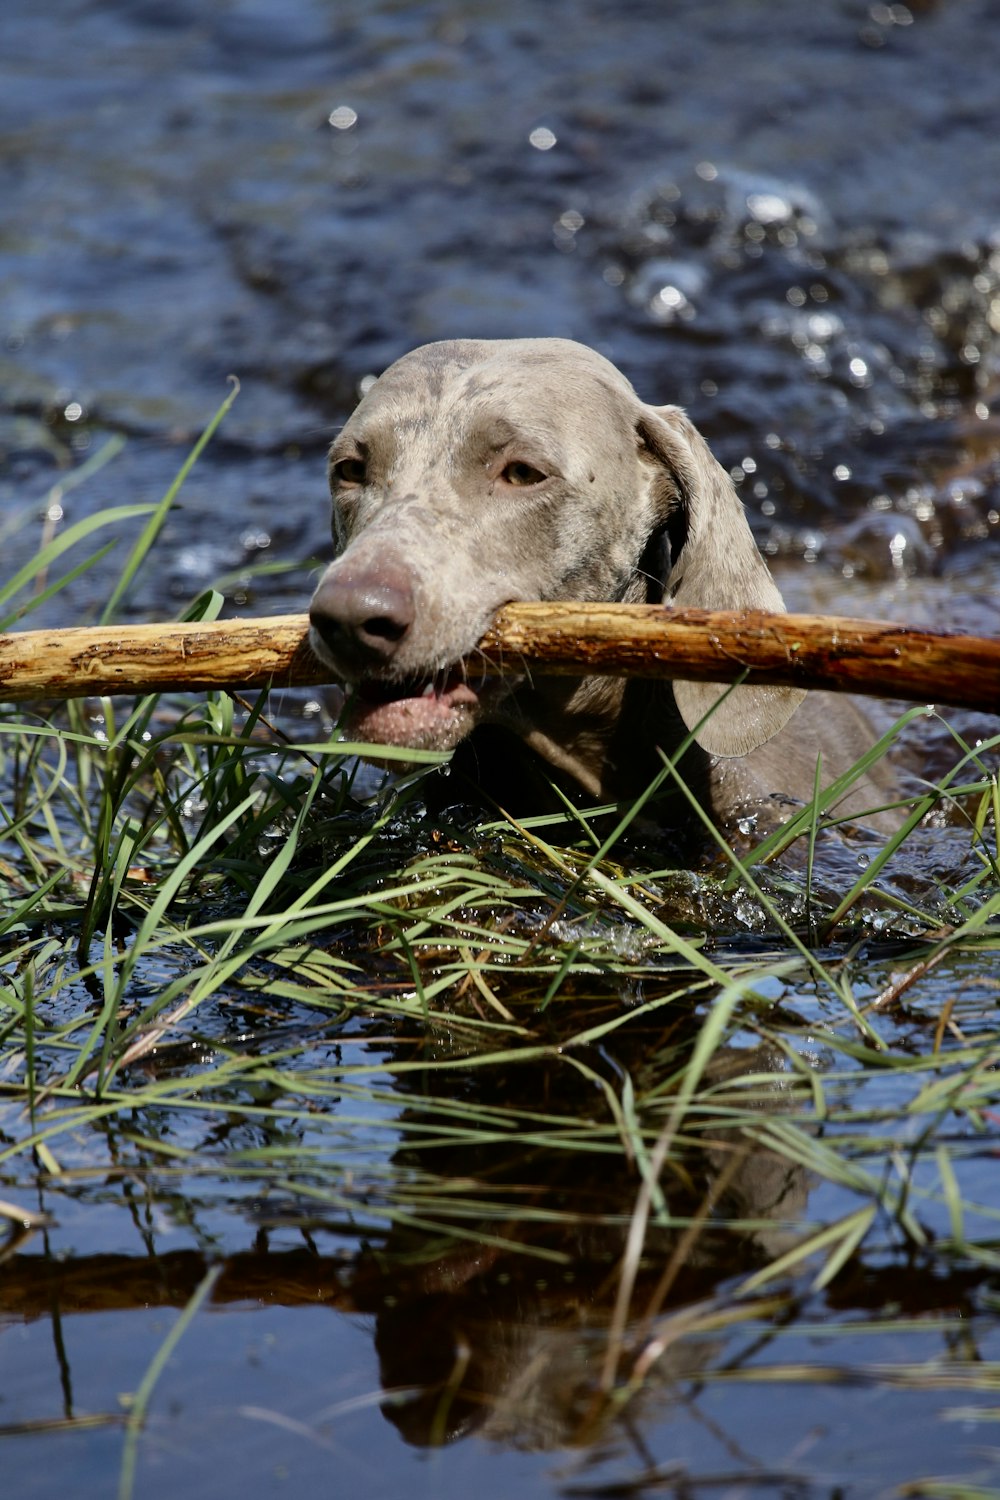 dog biting stick in body of water